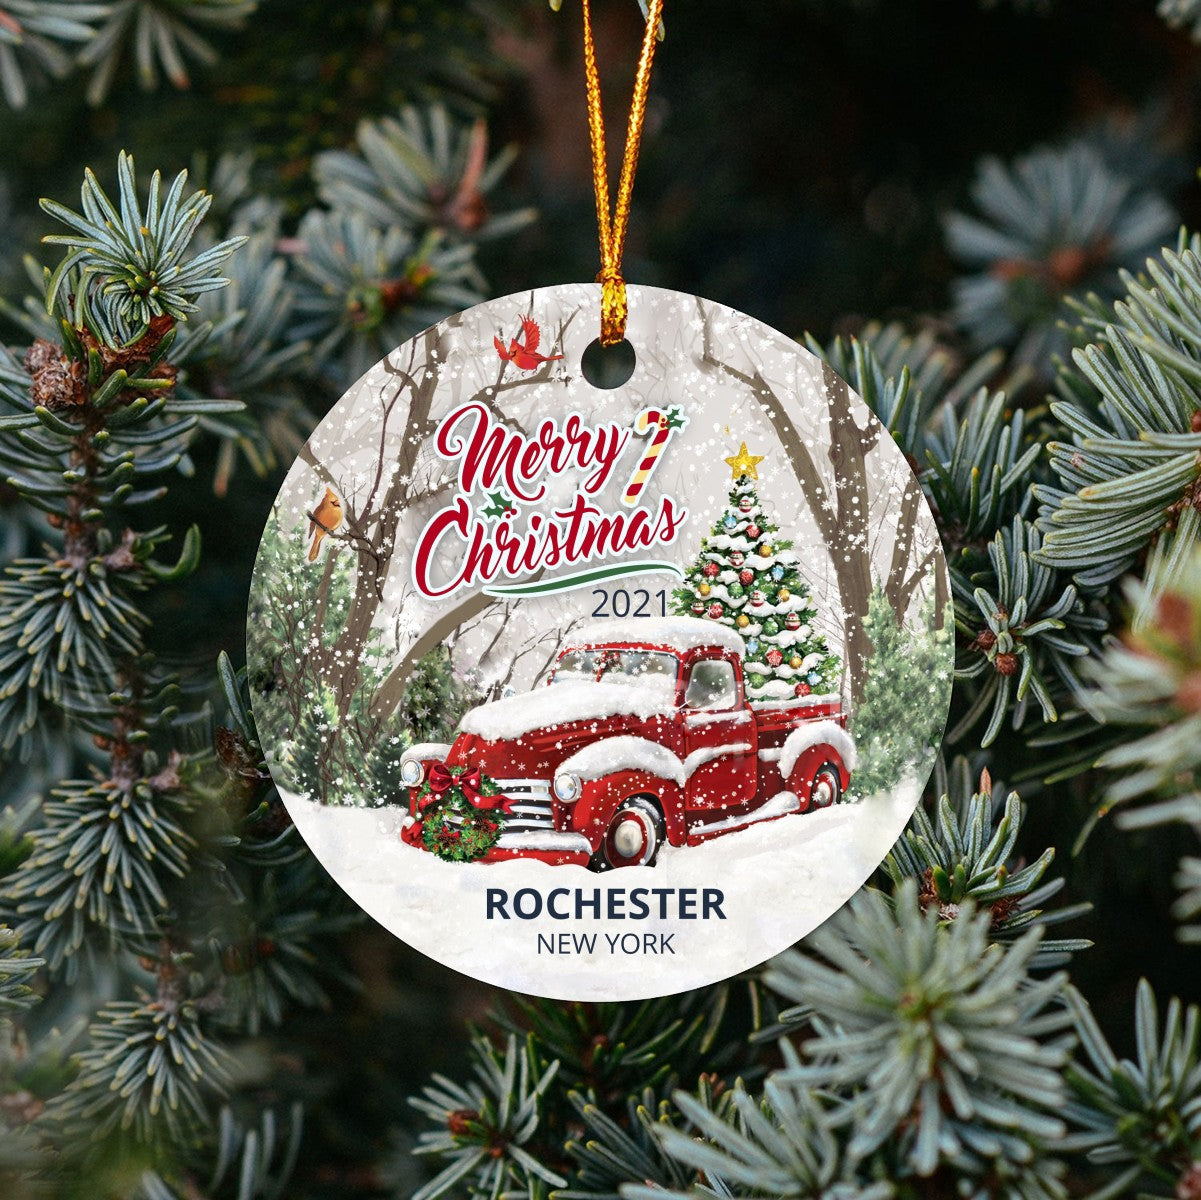 Christmas Tree Ornaments Rochester - Ornament Customize With Name City And State Rochester New York NY - Red Truck Xmas Ornaments 3'' Plastic Gift For Family, Friend And Housewarming